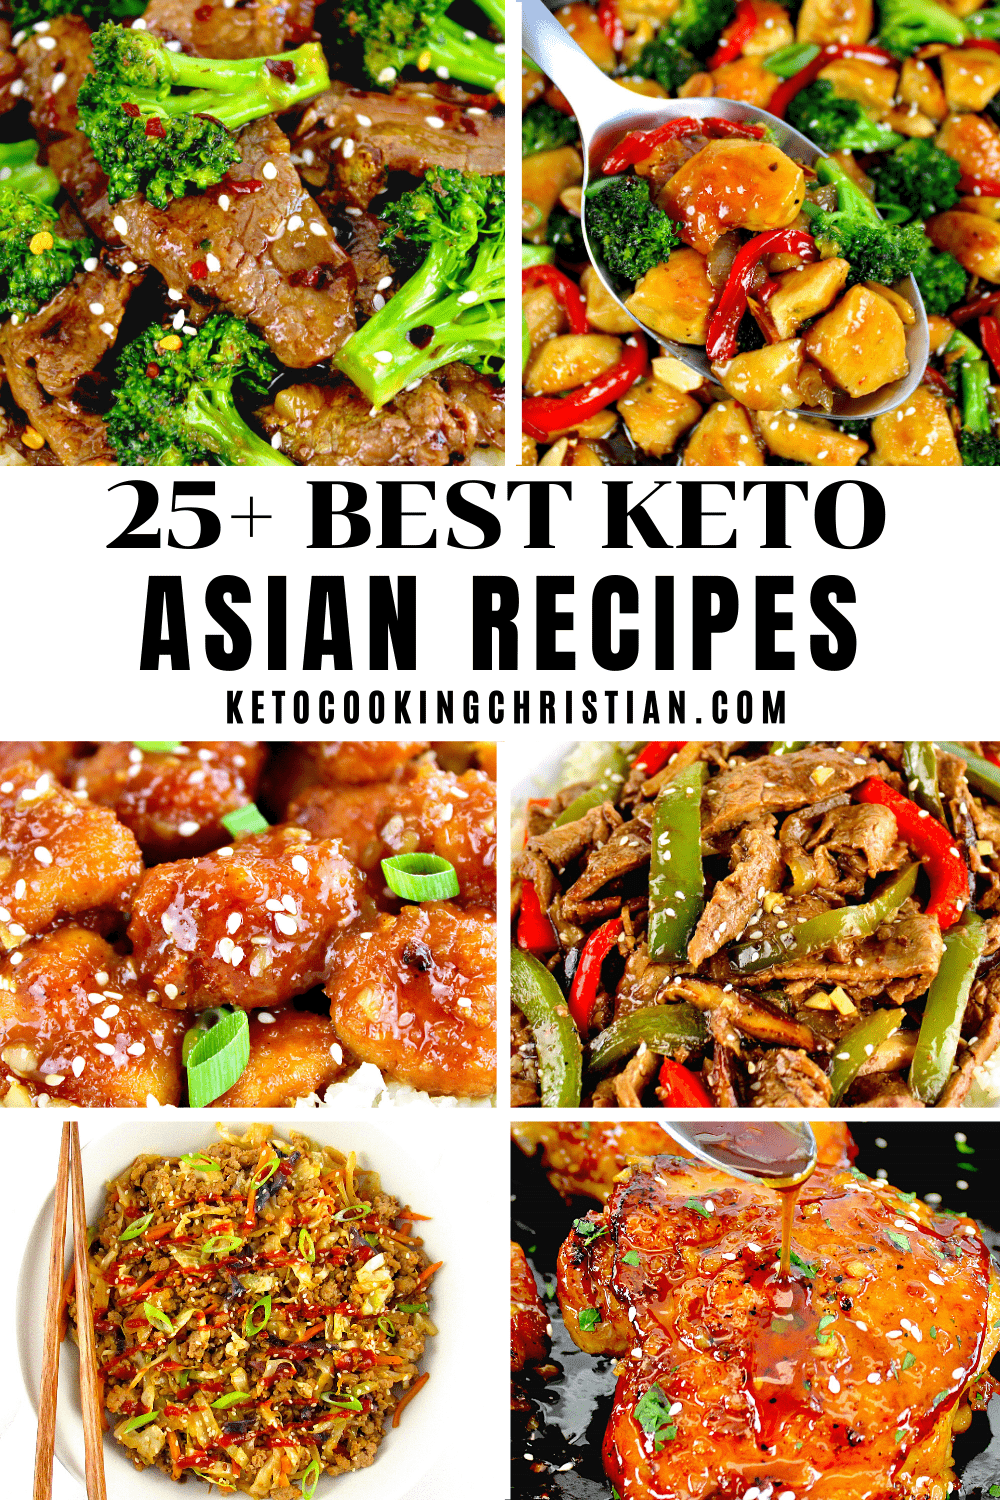 https://ketocookingchristian.com/wp-content/uploads/2023/03/Best-Keto-Asian-Recipes-pin-1.png